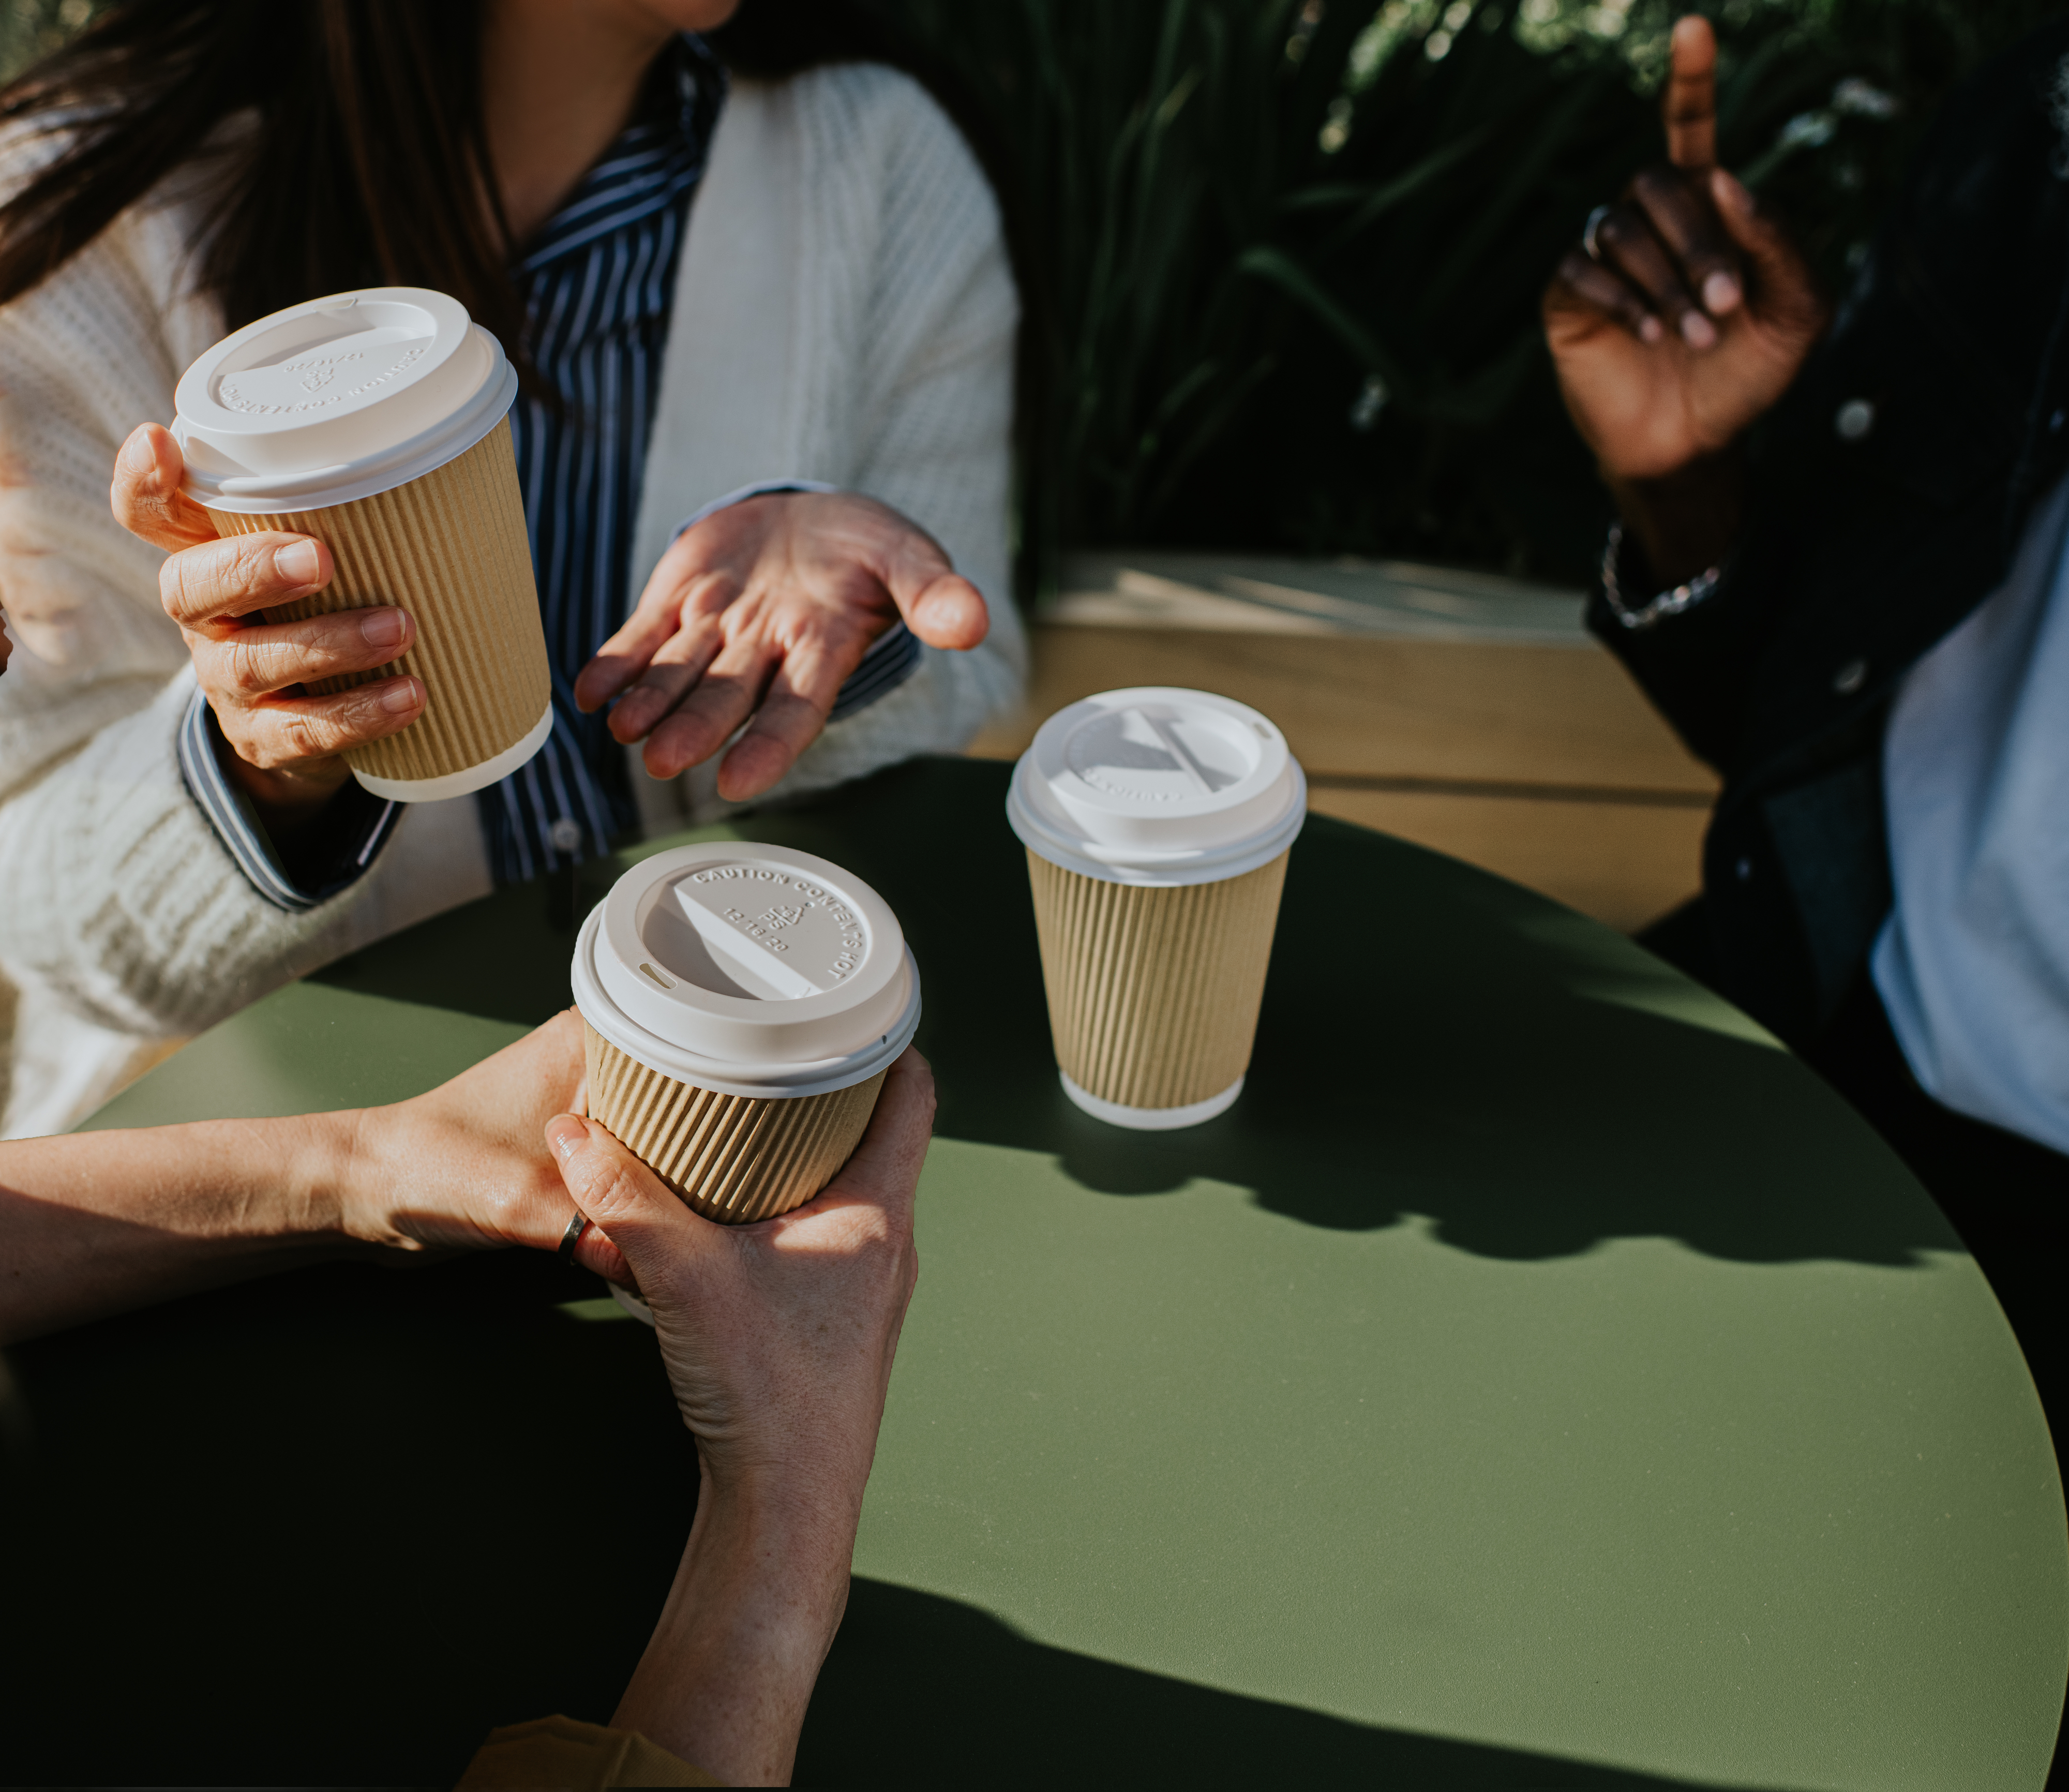 Four people&#x27;s hands, each holding a paper coffee cup over a table, suggesting a social meeting